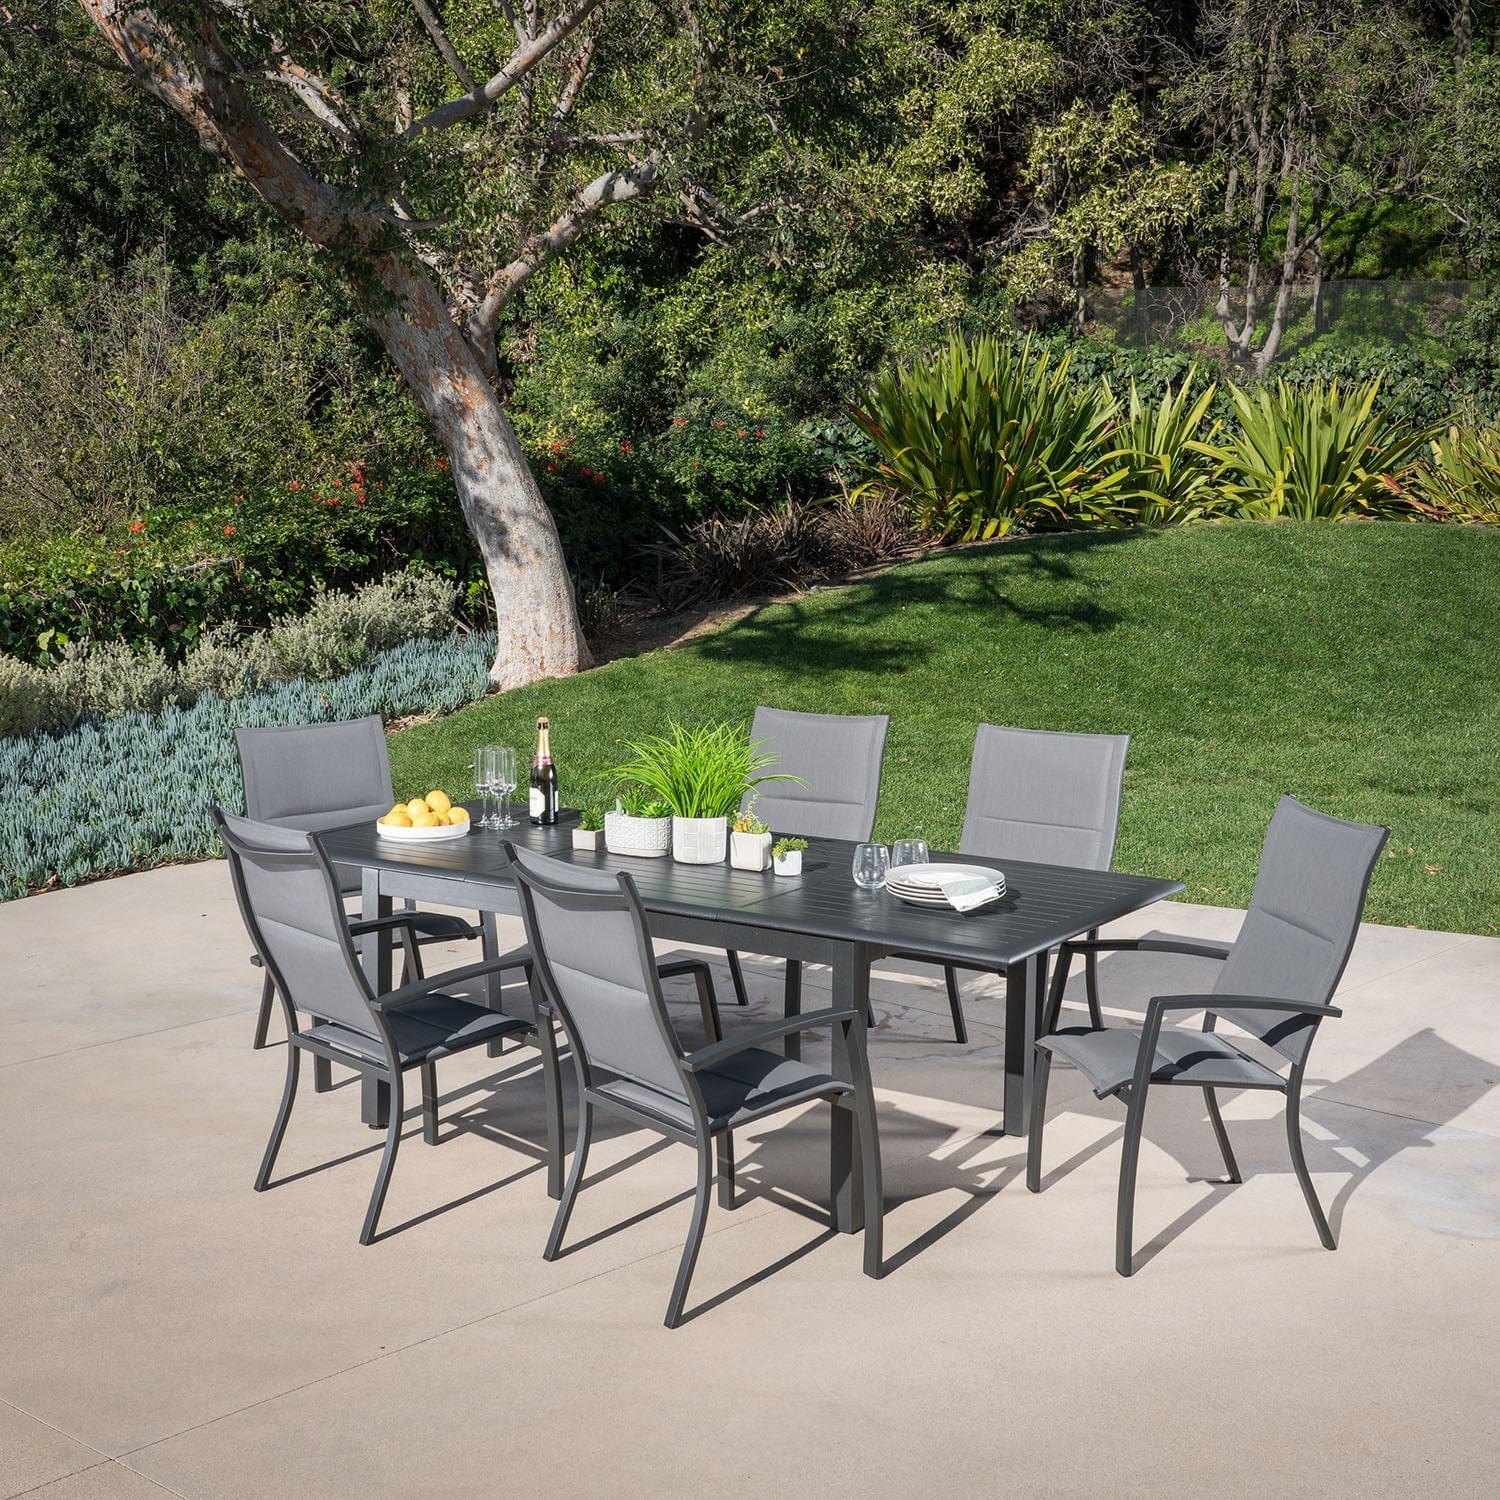 Hanover Outdoor Dining Set Hanover - Cameron 7-Piece Expandable Dining Set with 6 Padded Sling Dining Chairs and a 40" x 94" Table - CAMDN7PCHB-GRY